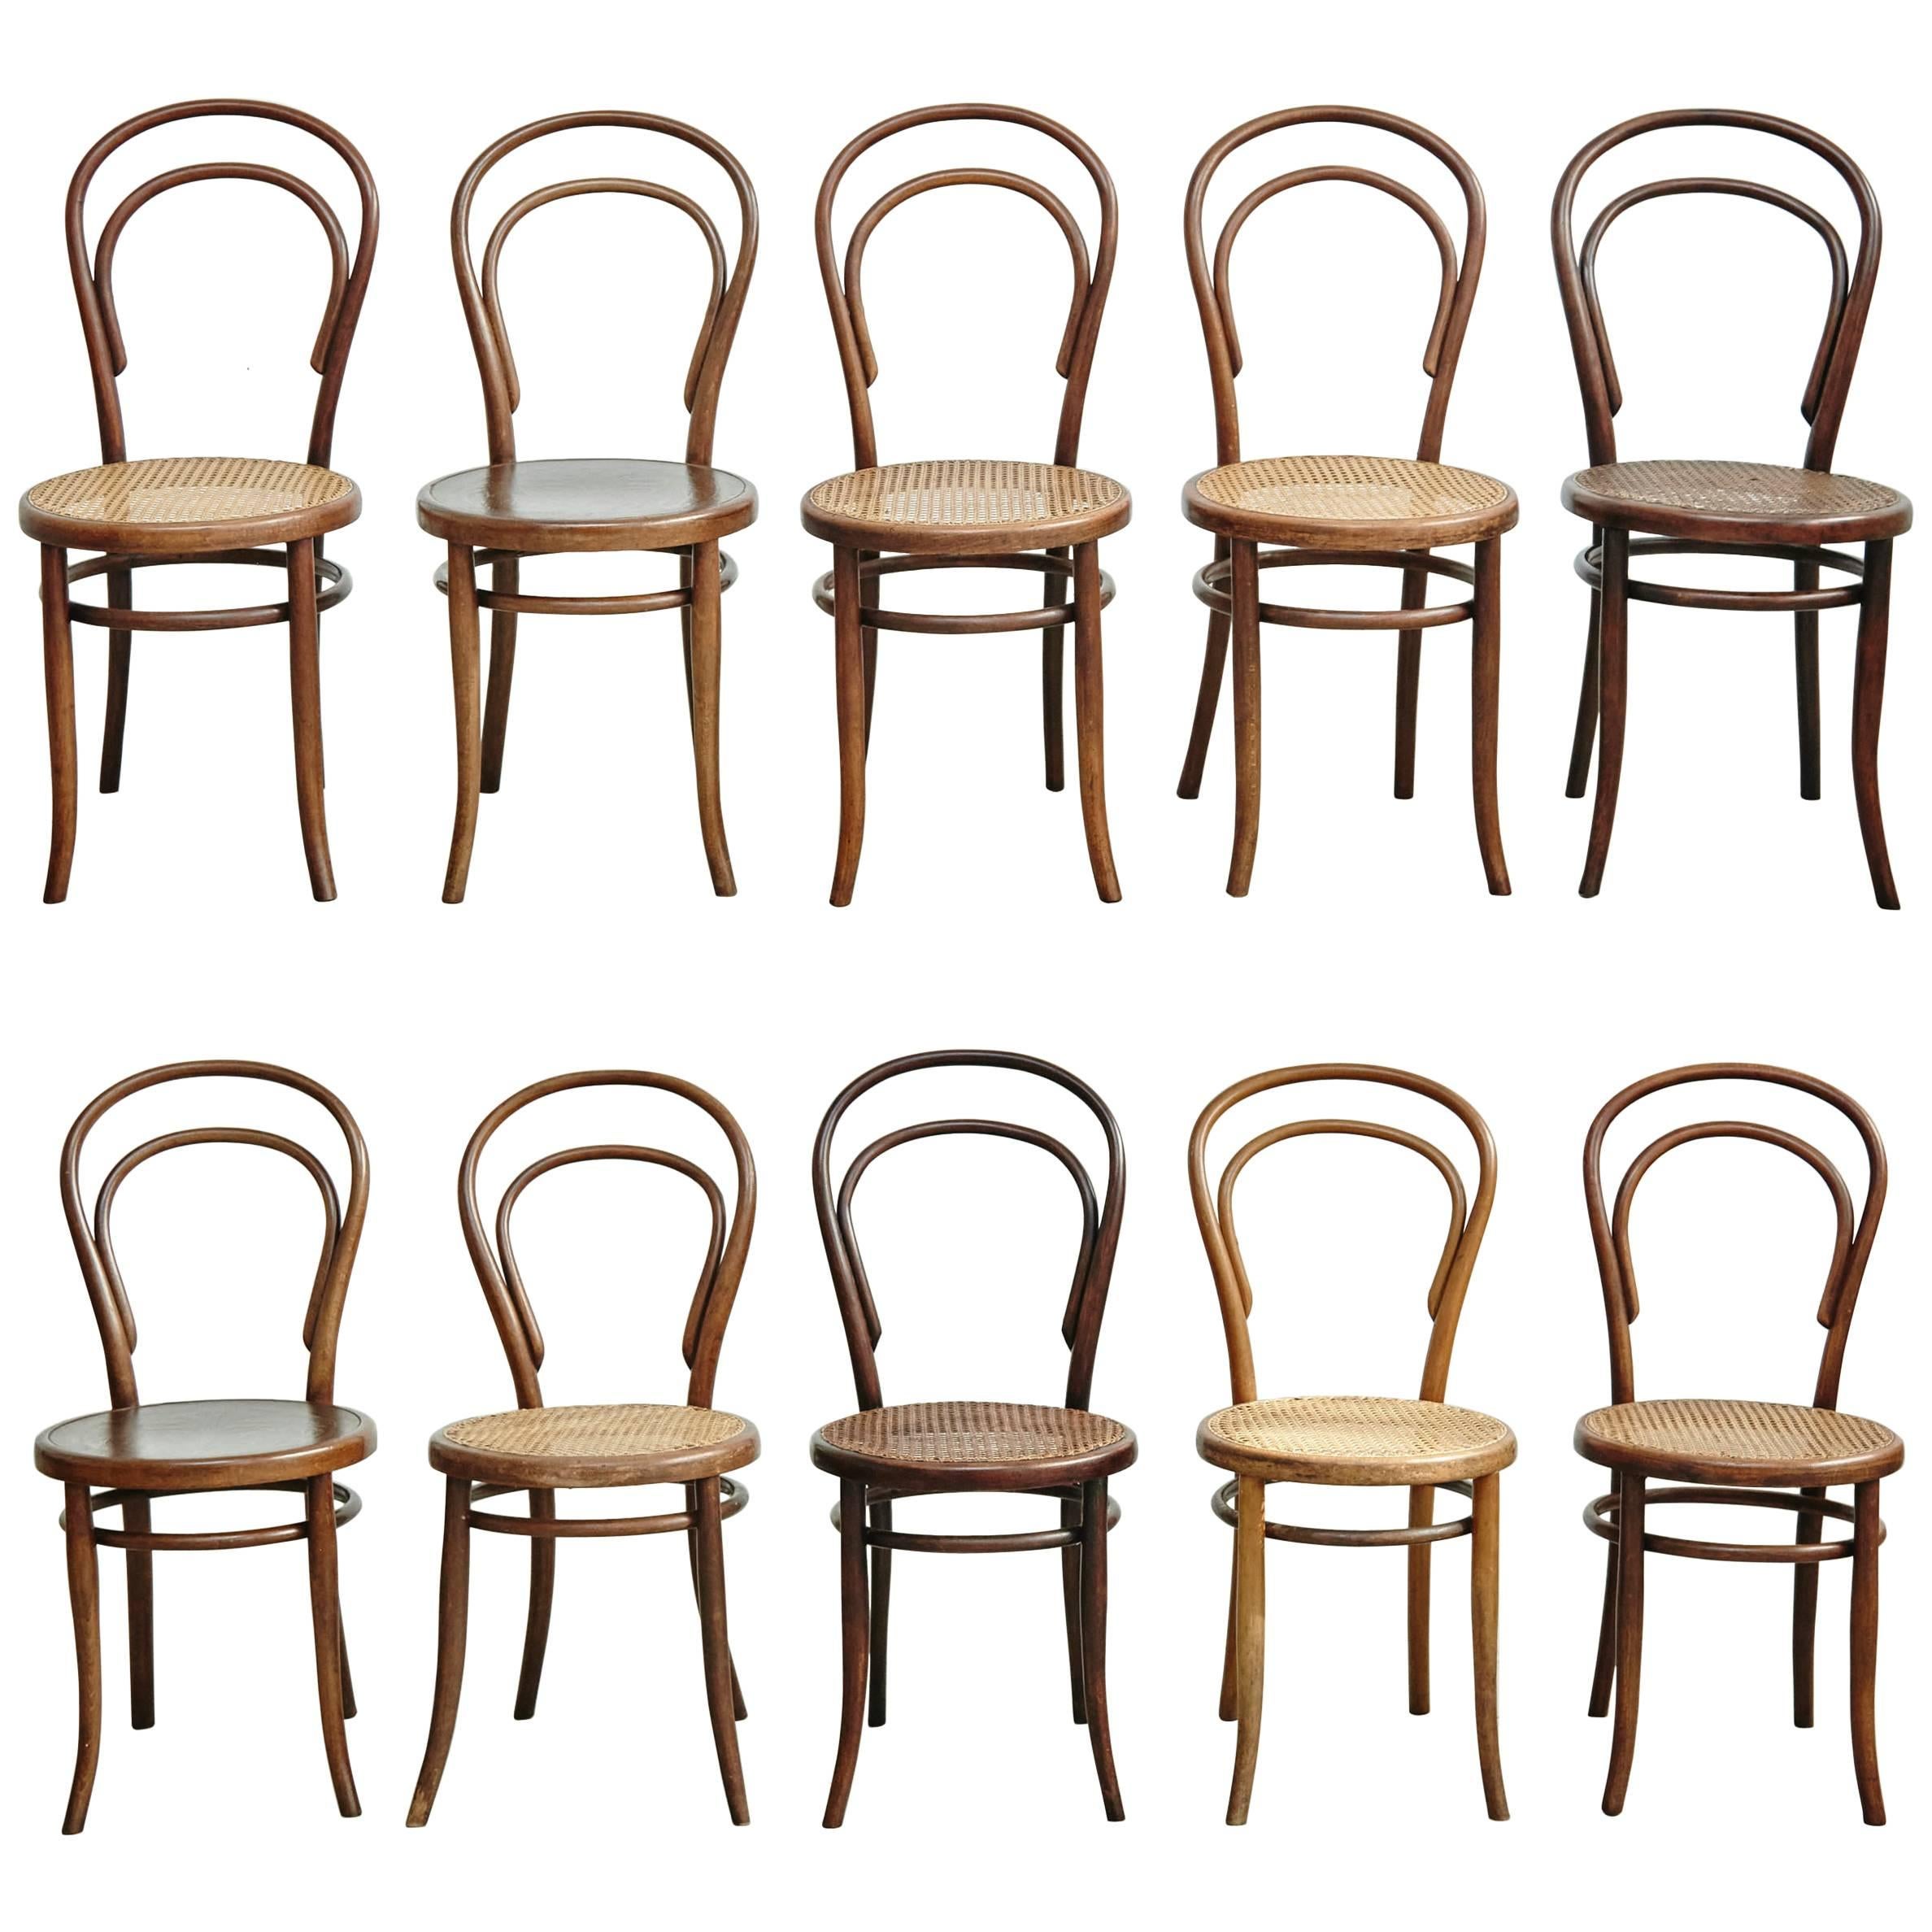 Set of Ten Chairs by Thonet, Fischel, Kohn and Unknown, circa 1900